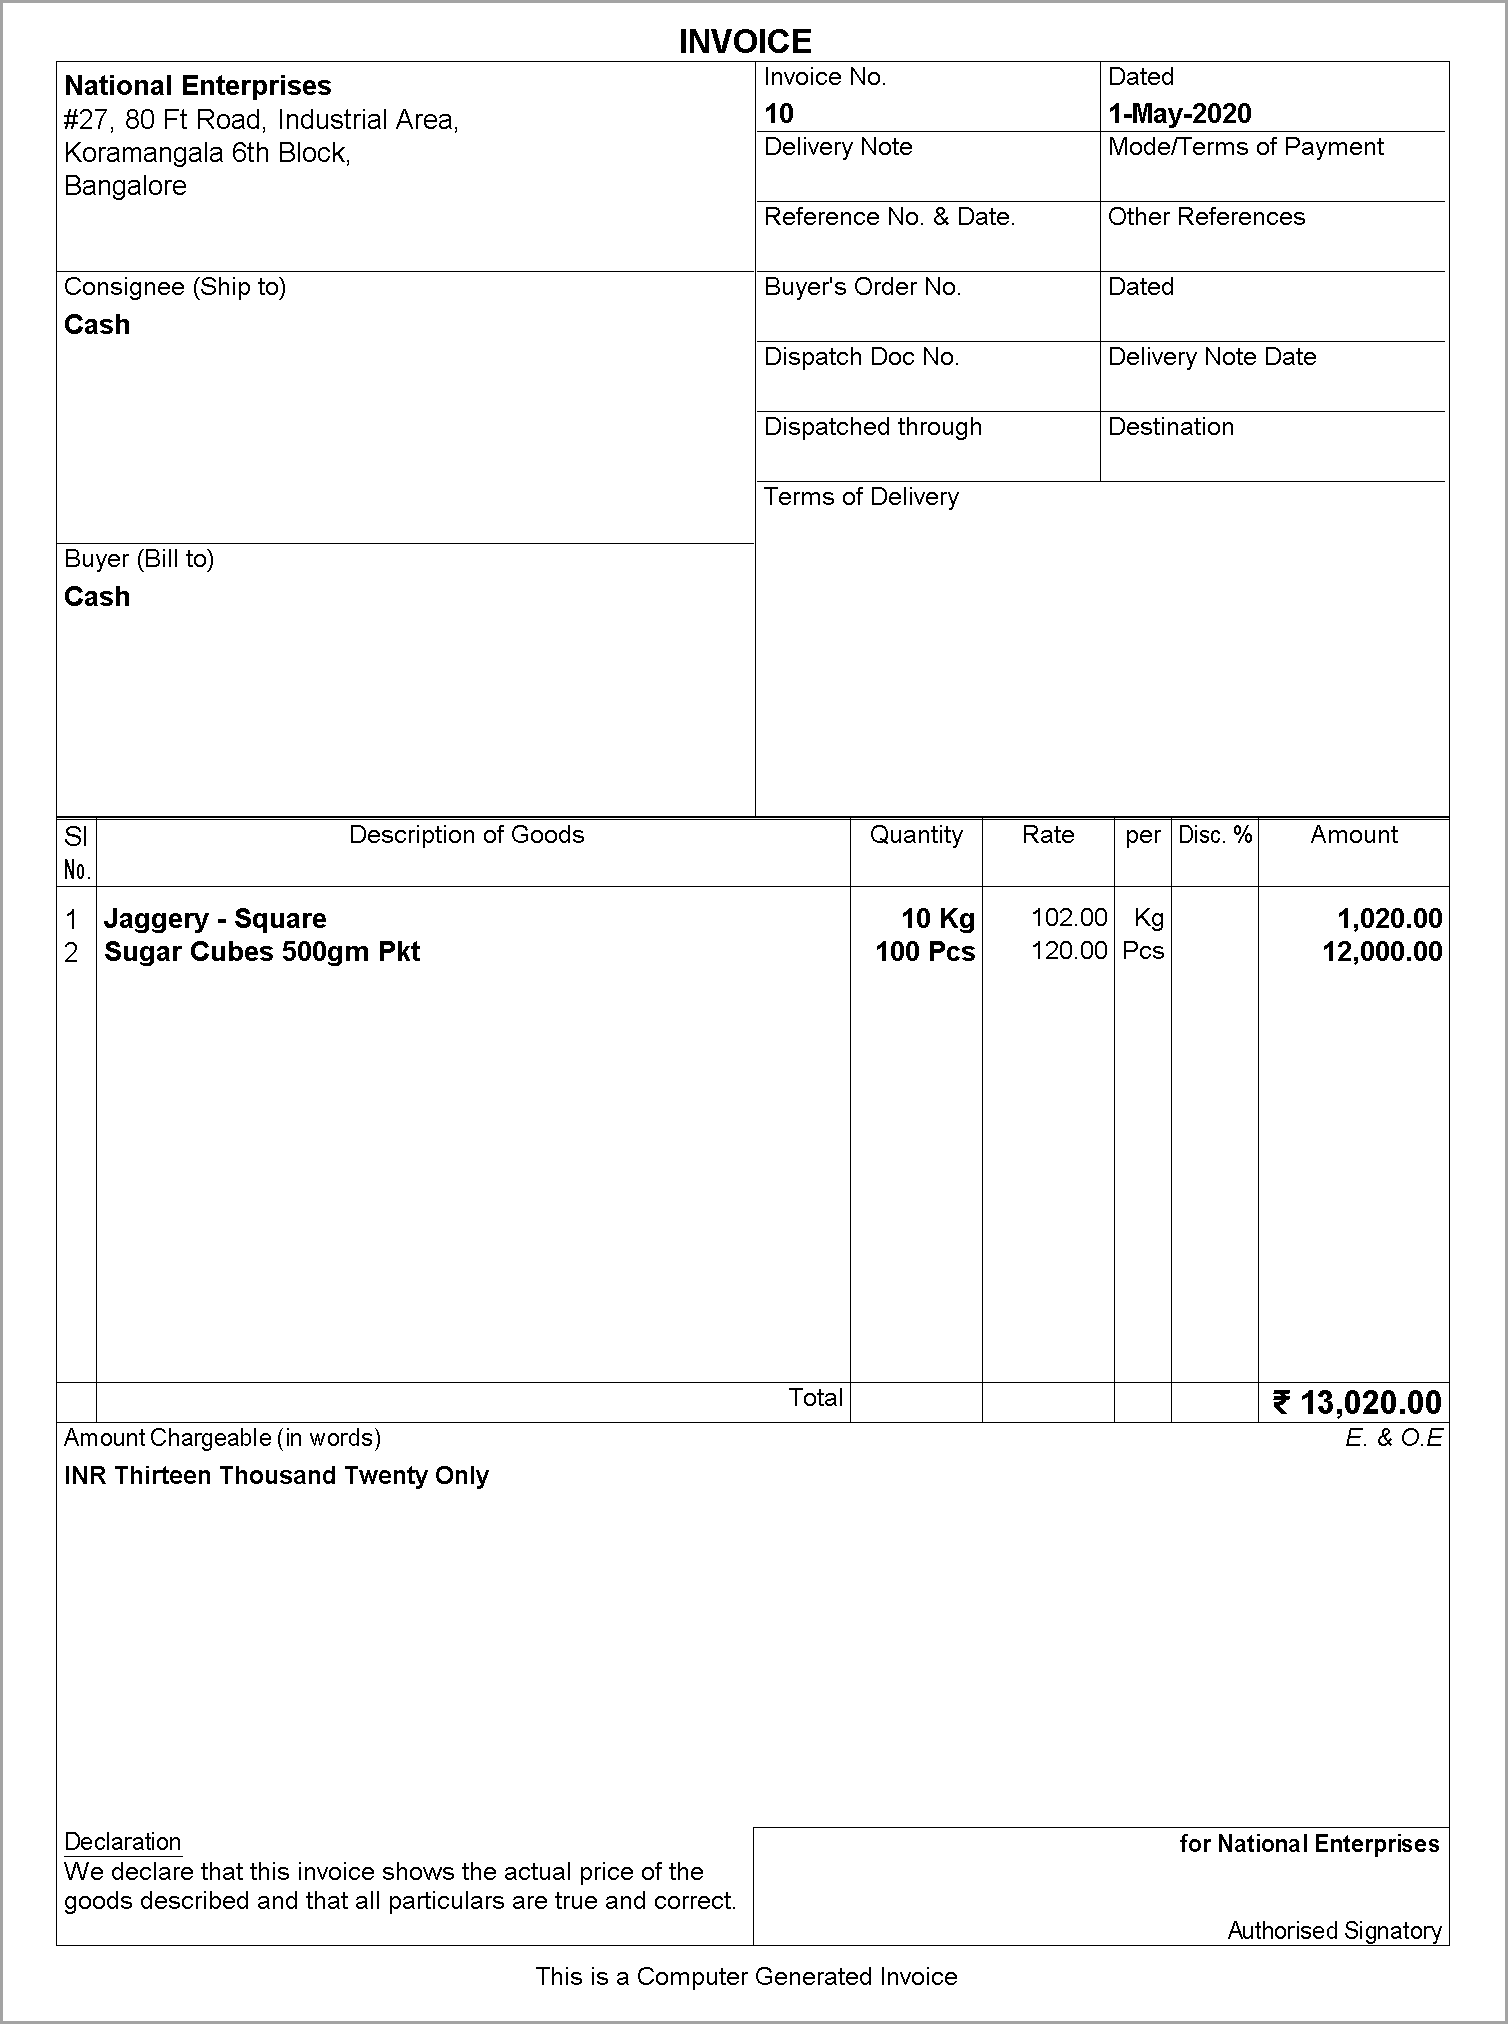 Invoice printed from TallyPrime